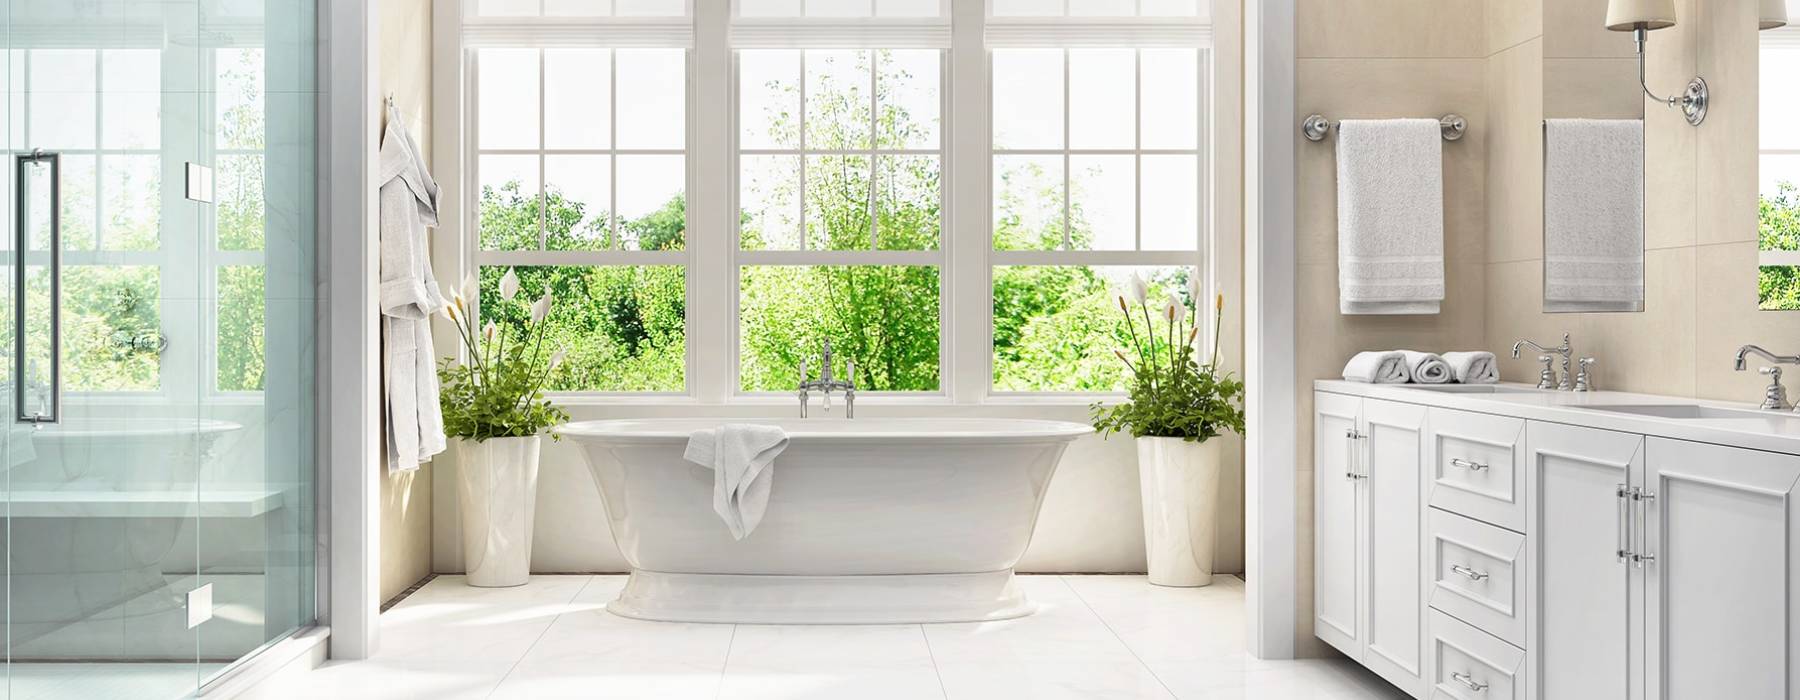 Bathtub-Replacement-and-Installation-in-Lehigh-Valley-PA